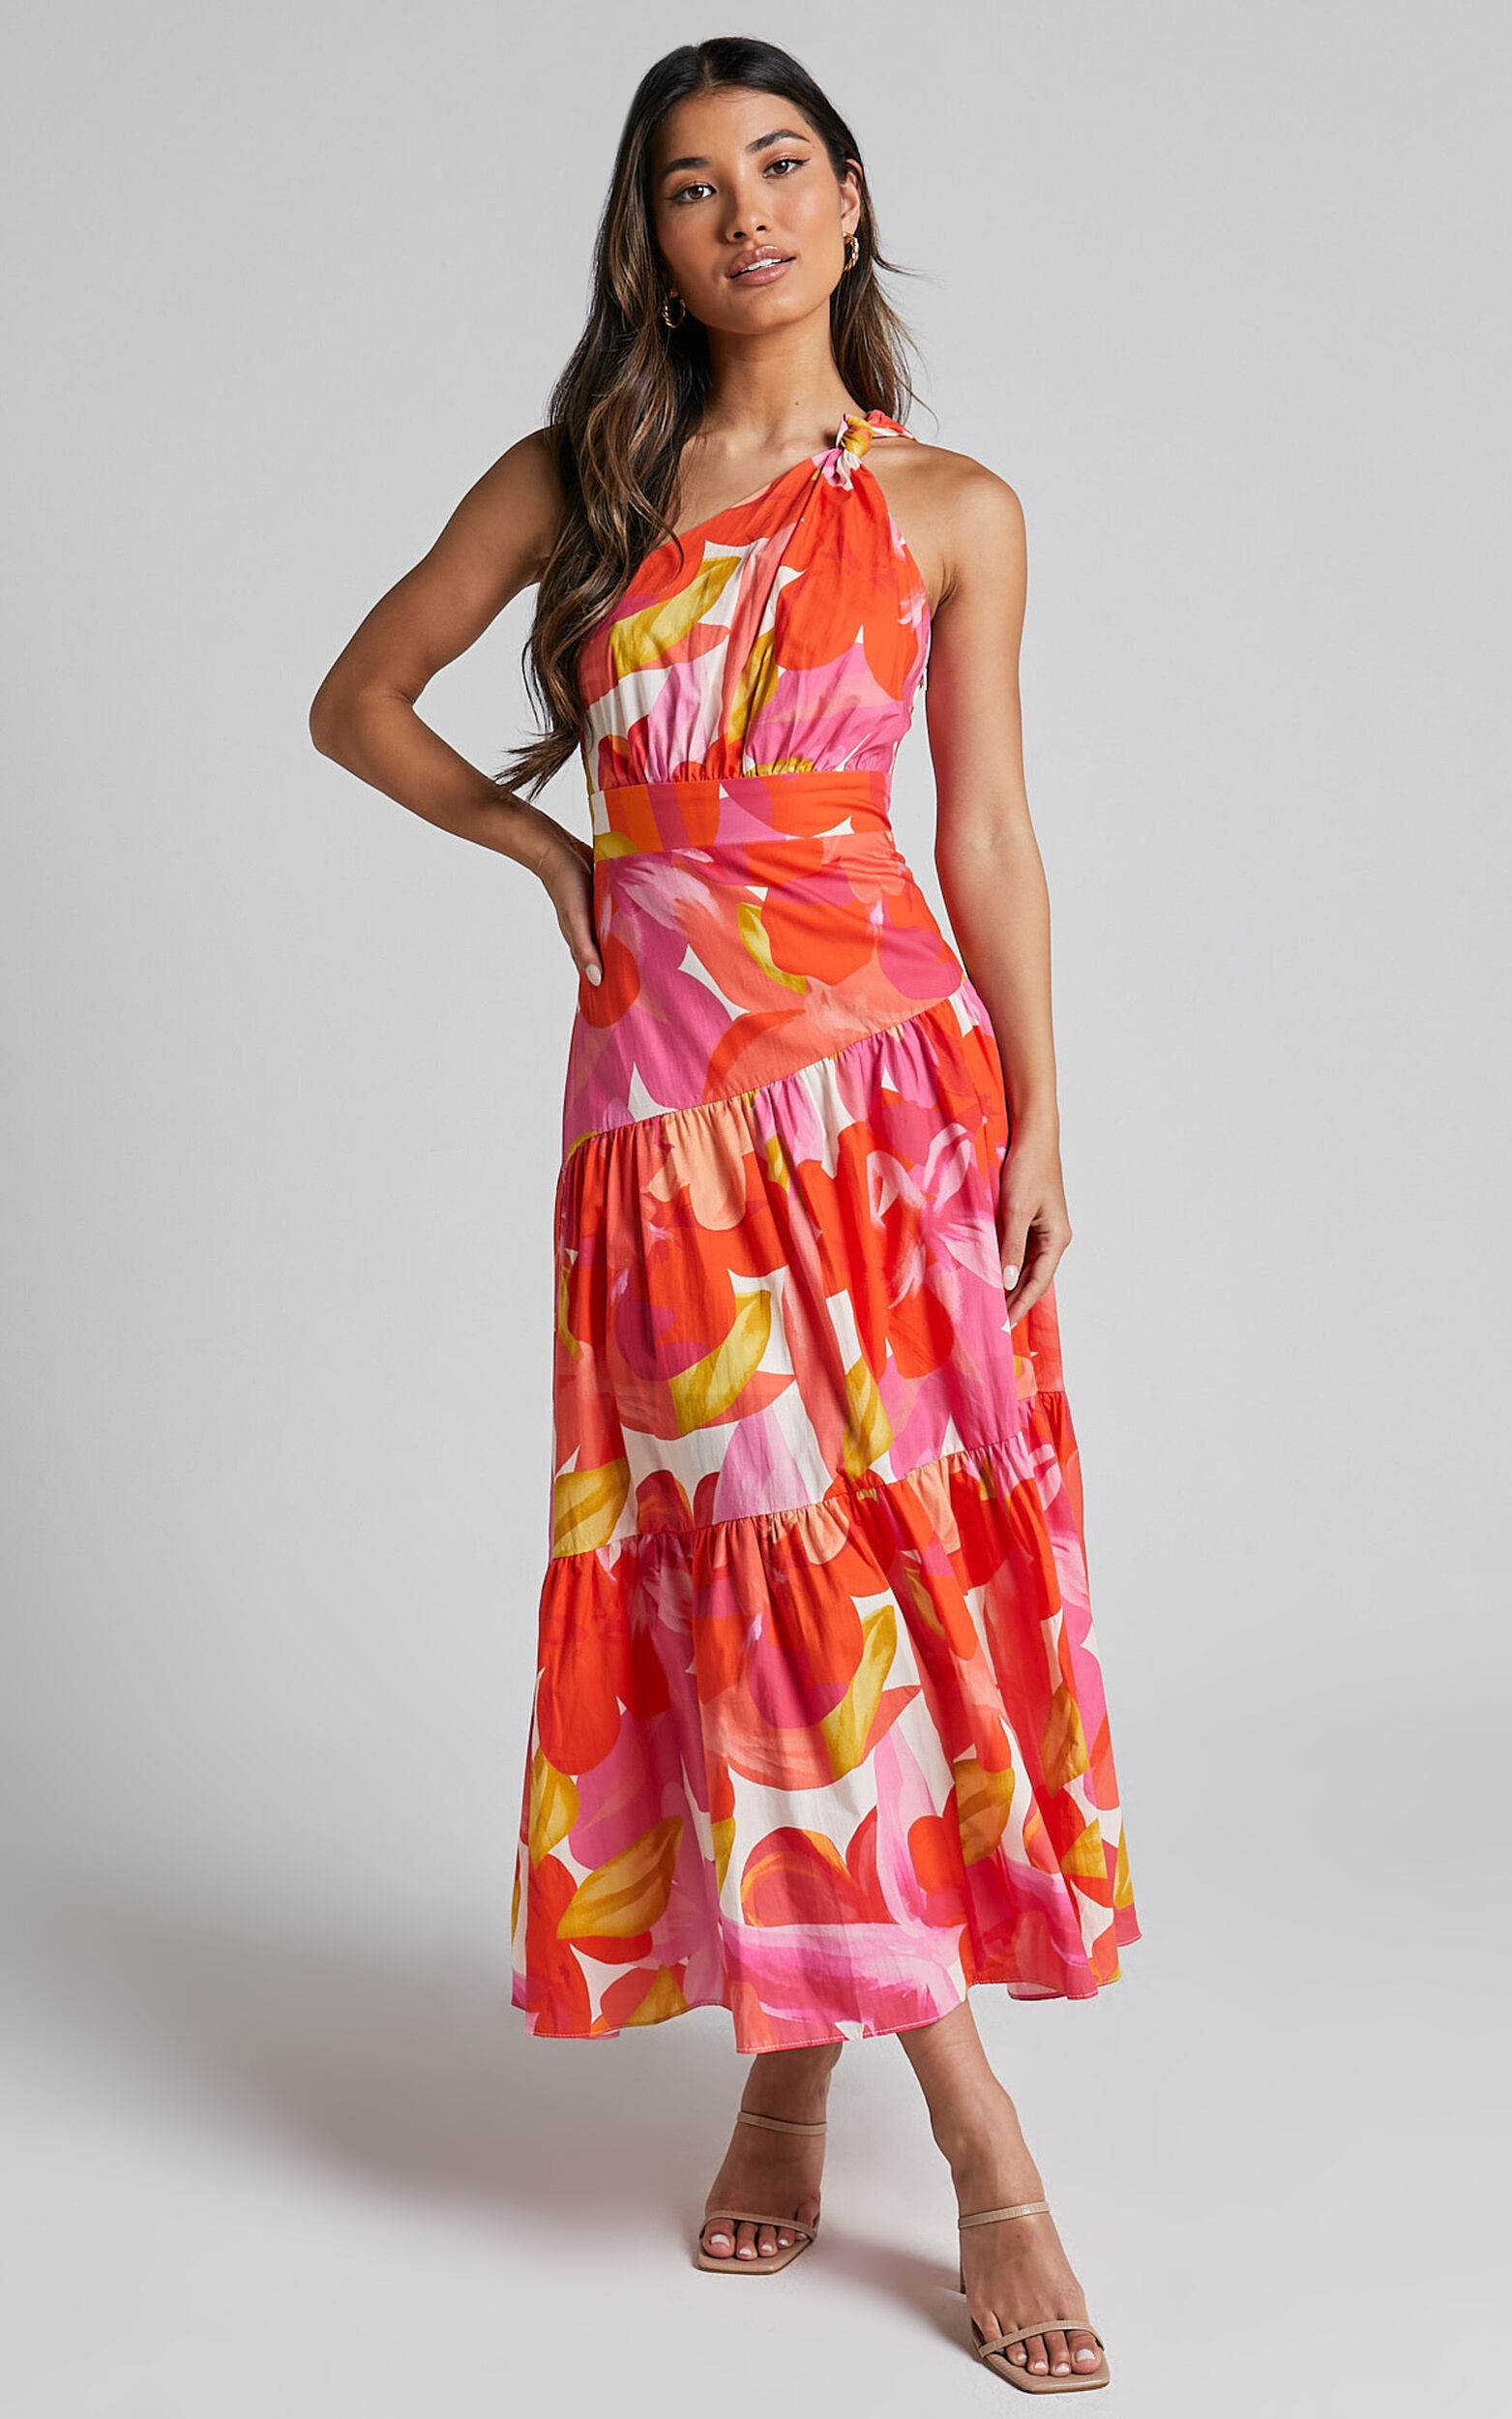 Merclaire Midi Dress - One Shoulder Tiered Dress in Orange Floral - 06, ORG1